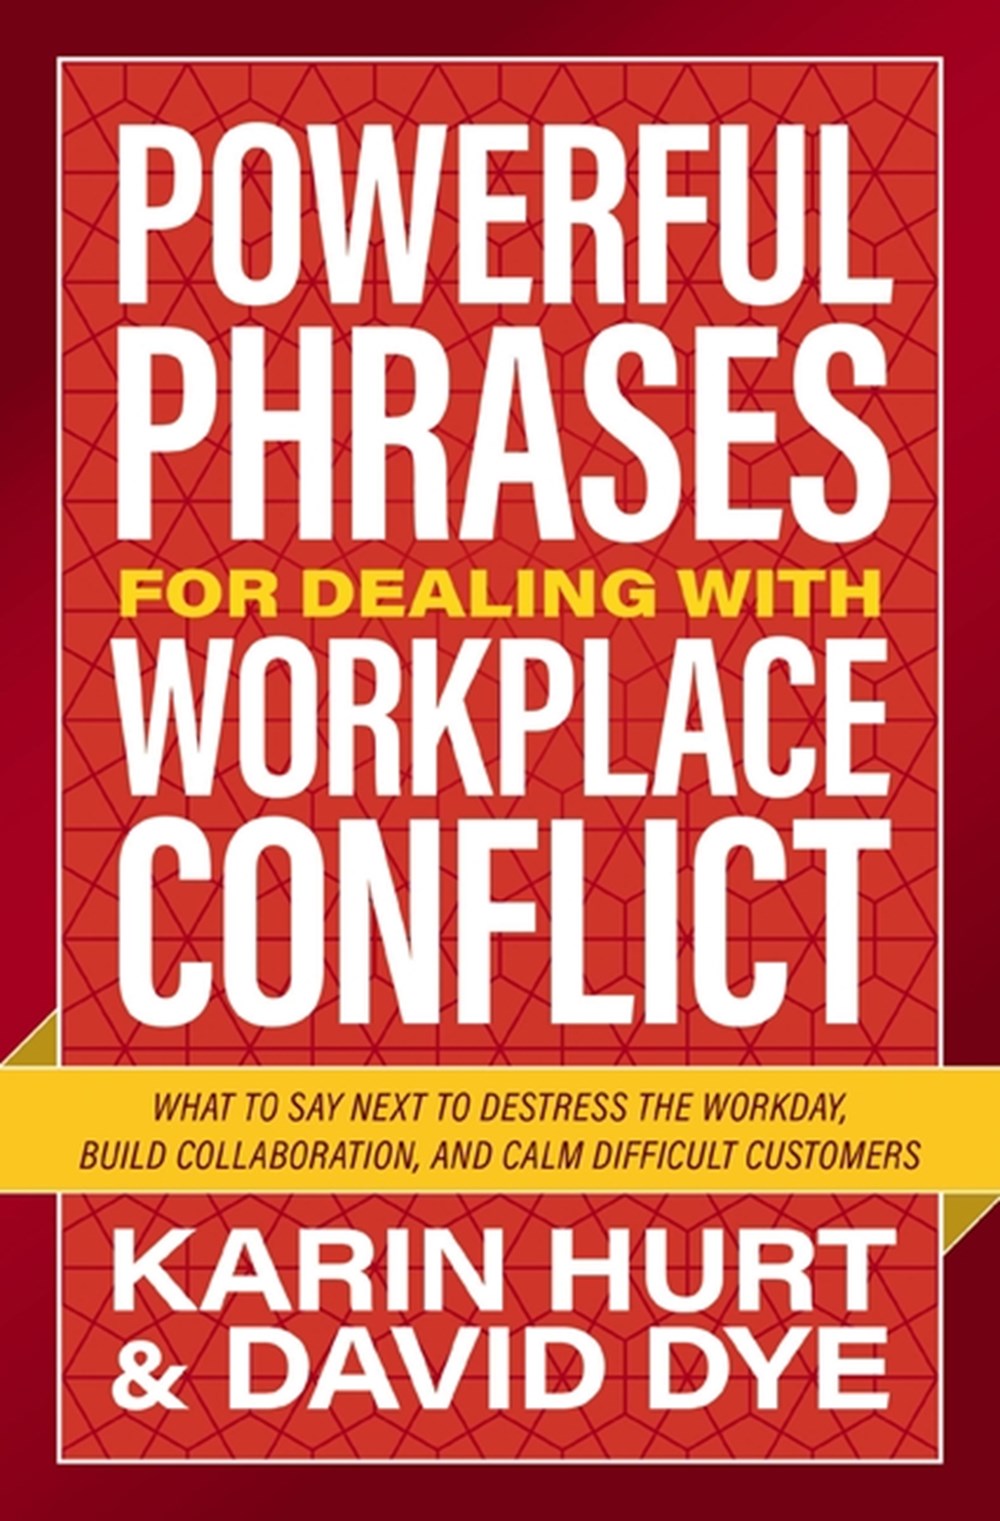 Powerful Phrases for Dealing with Workplace Conflict: What to Say Next to Destress the Workday, Buil